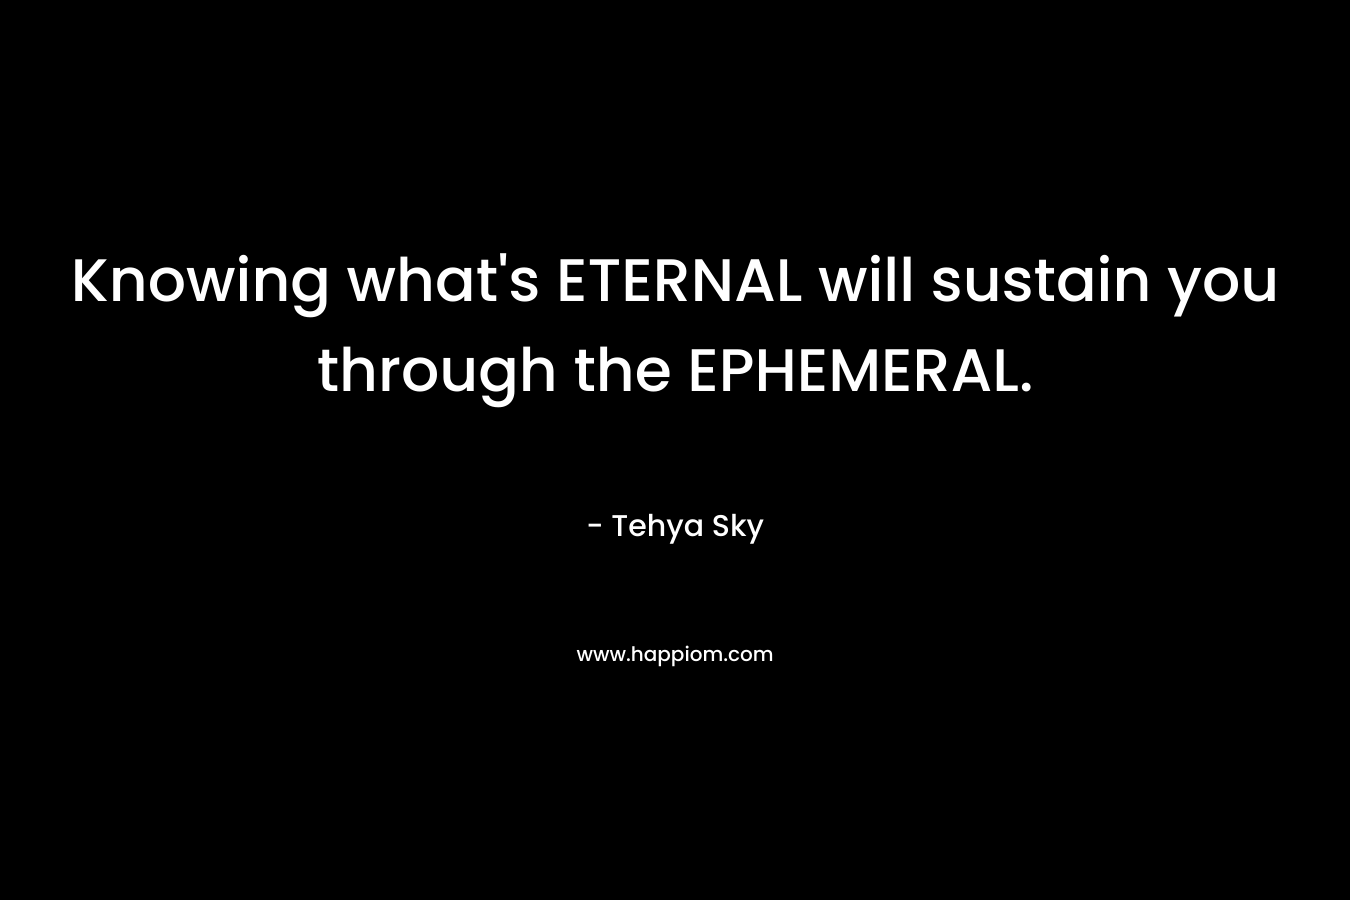 Knowing what's ETERNAL will sustain you through the EPHEMERAL.